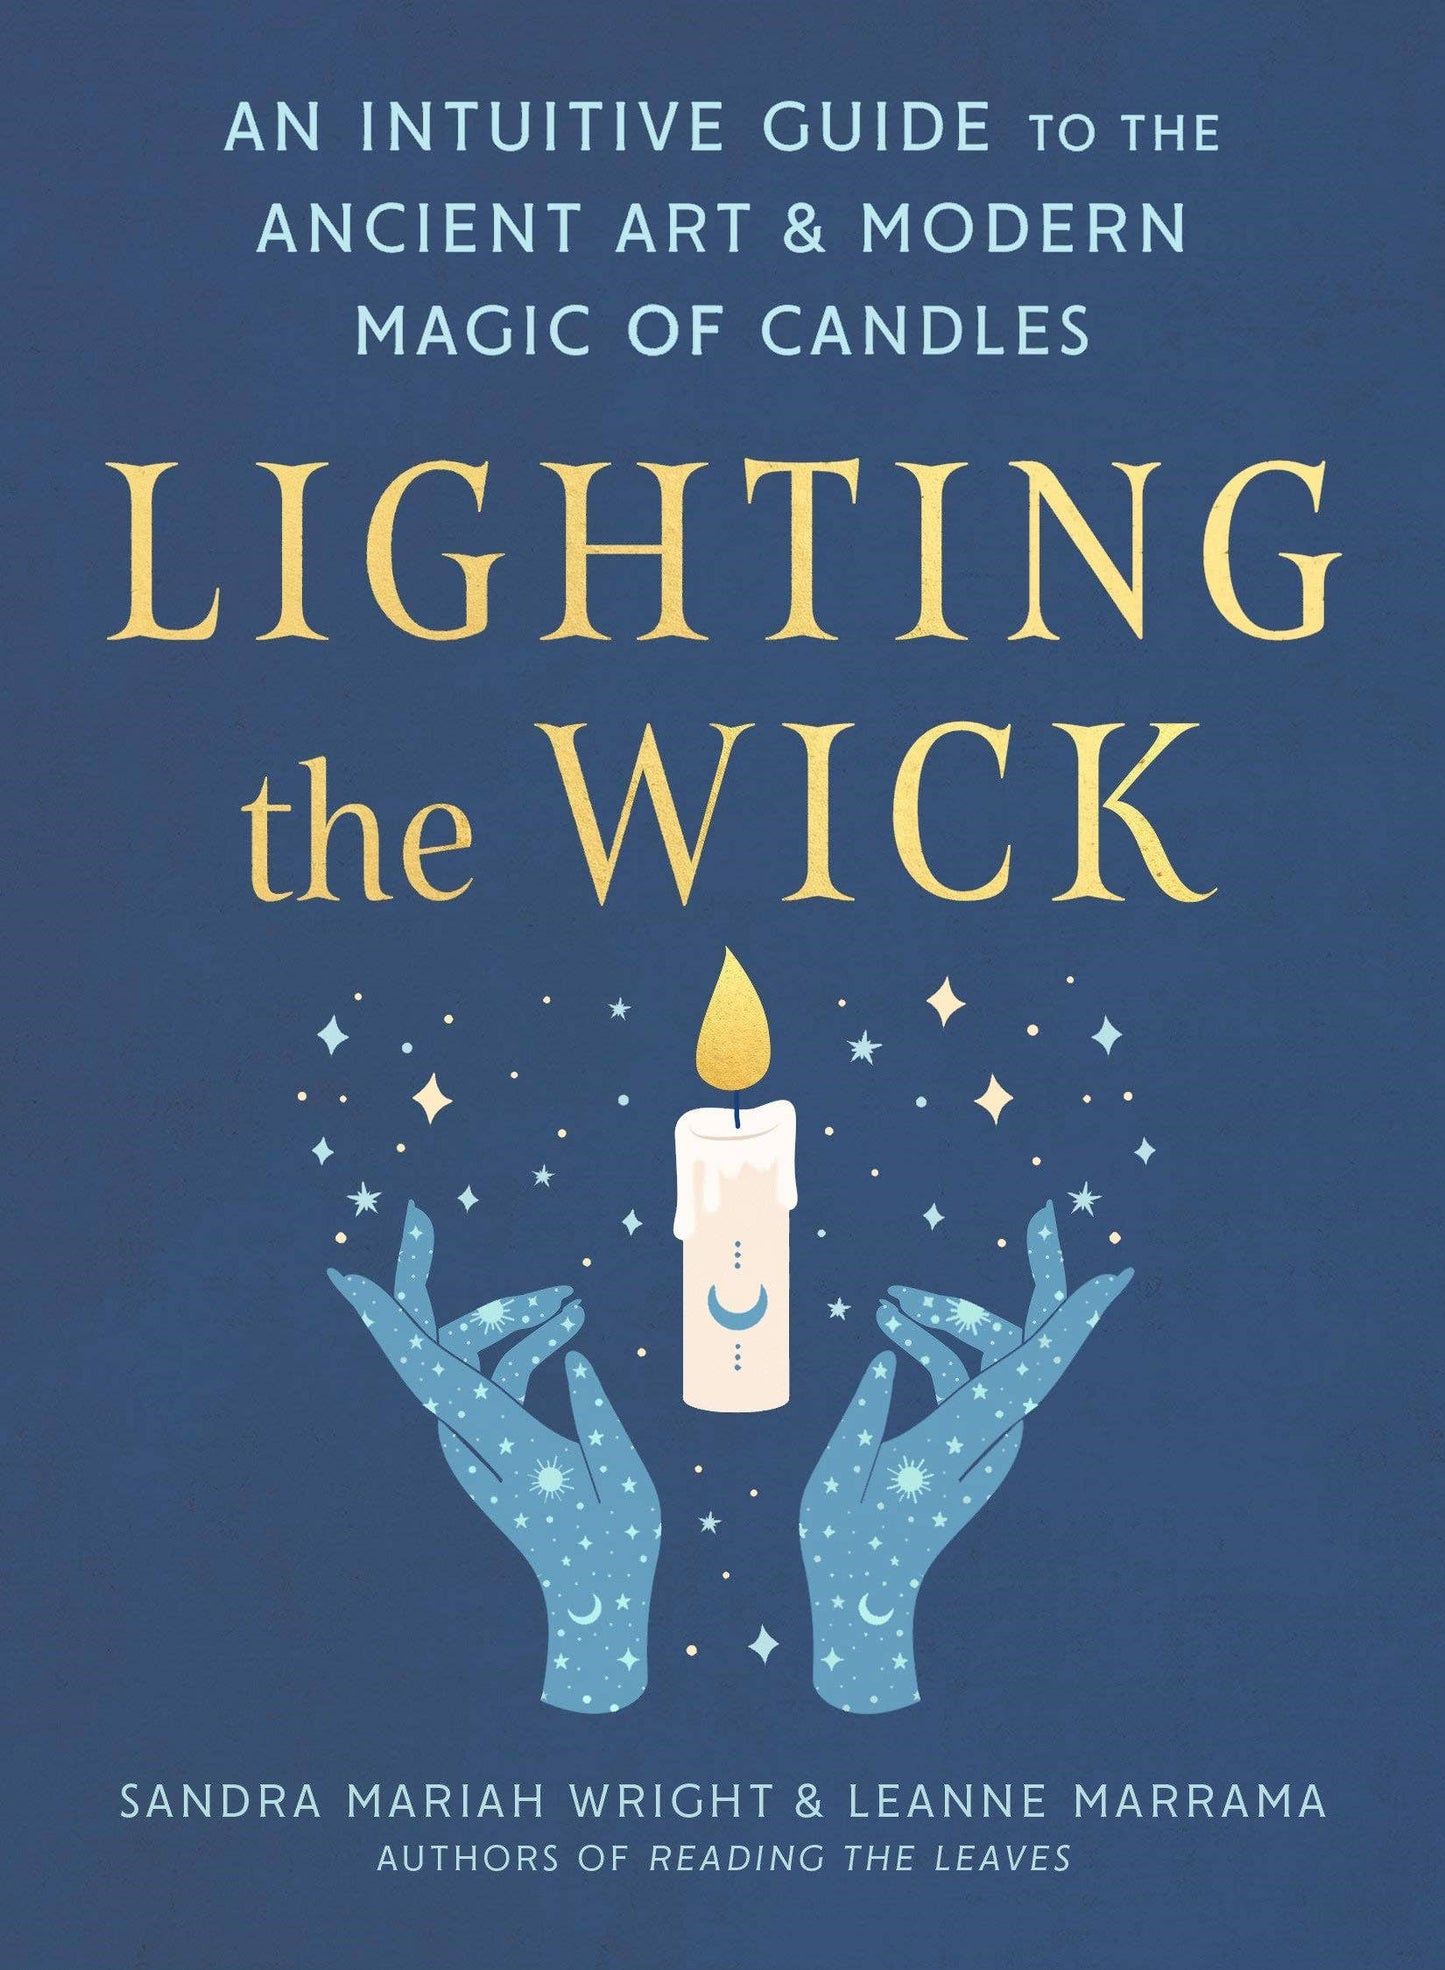 Lighting the Wick: The Ancient Art & Modern Magic of Candles